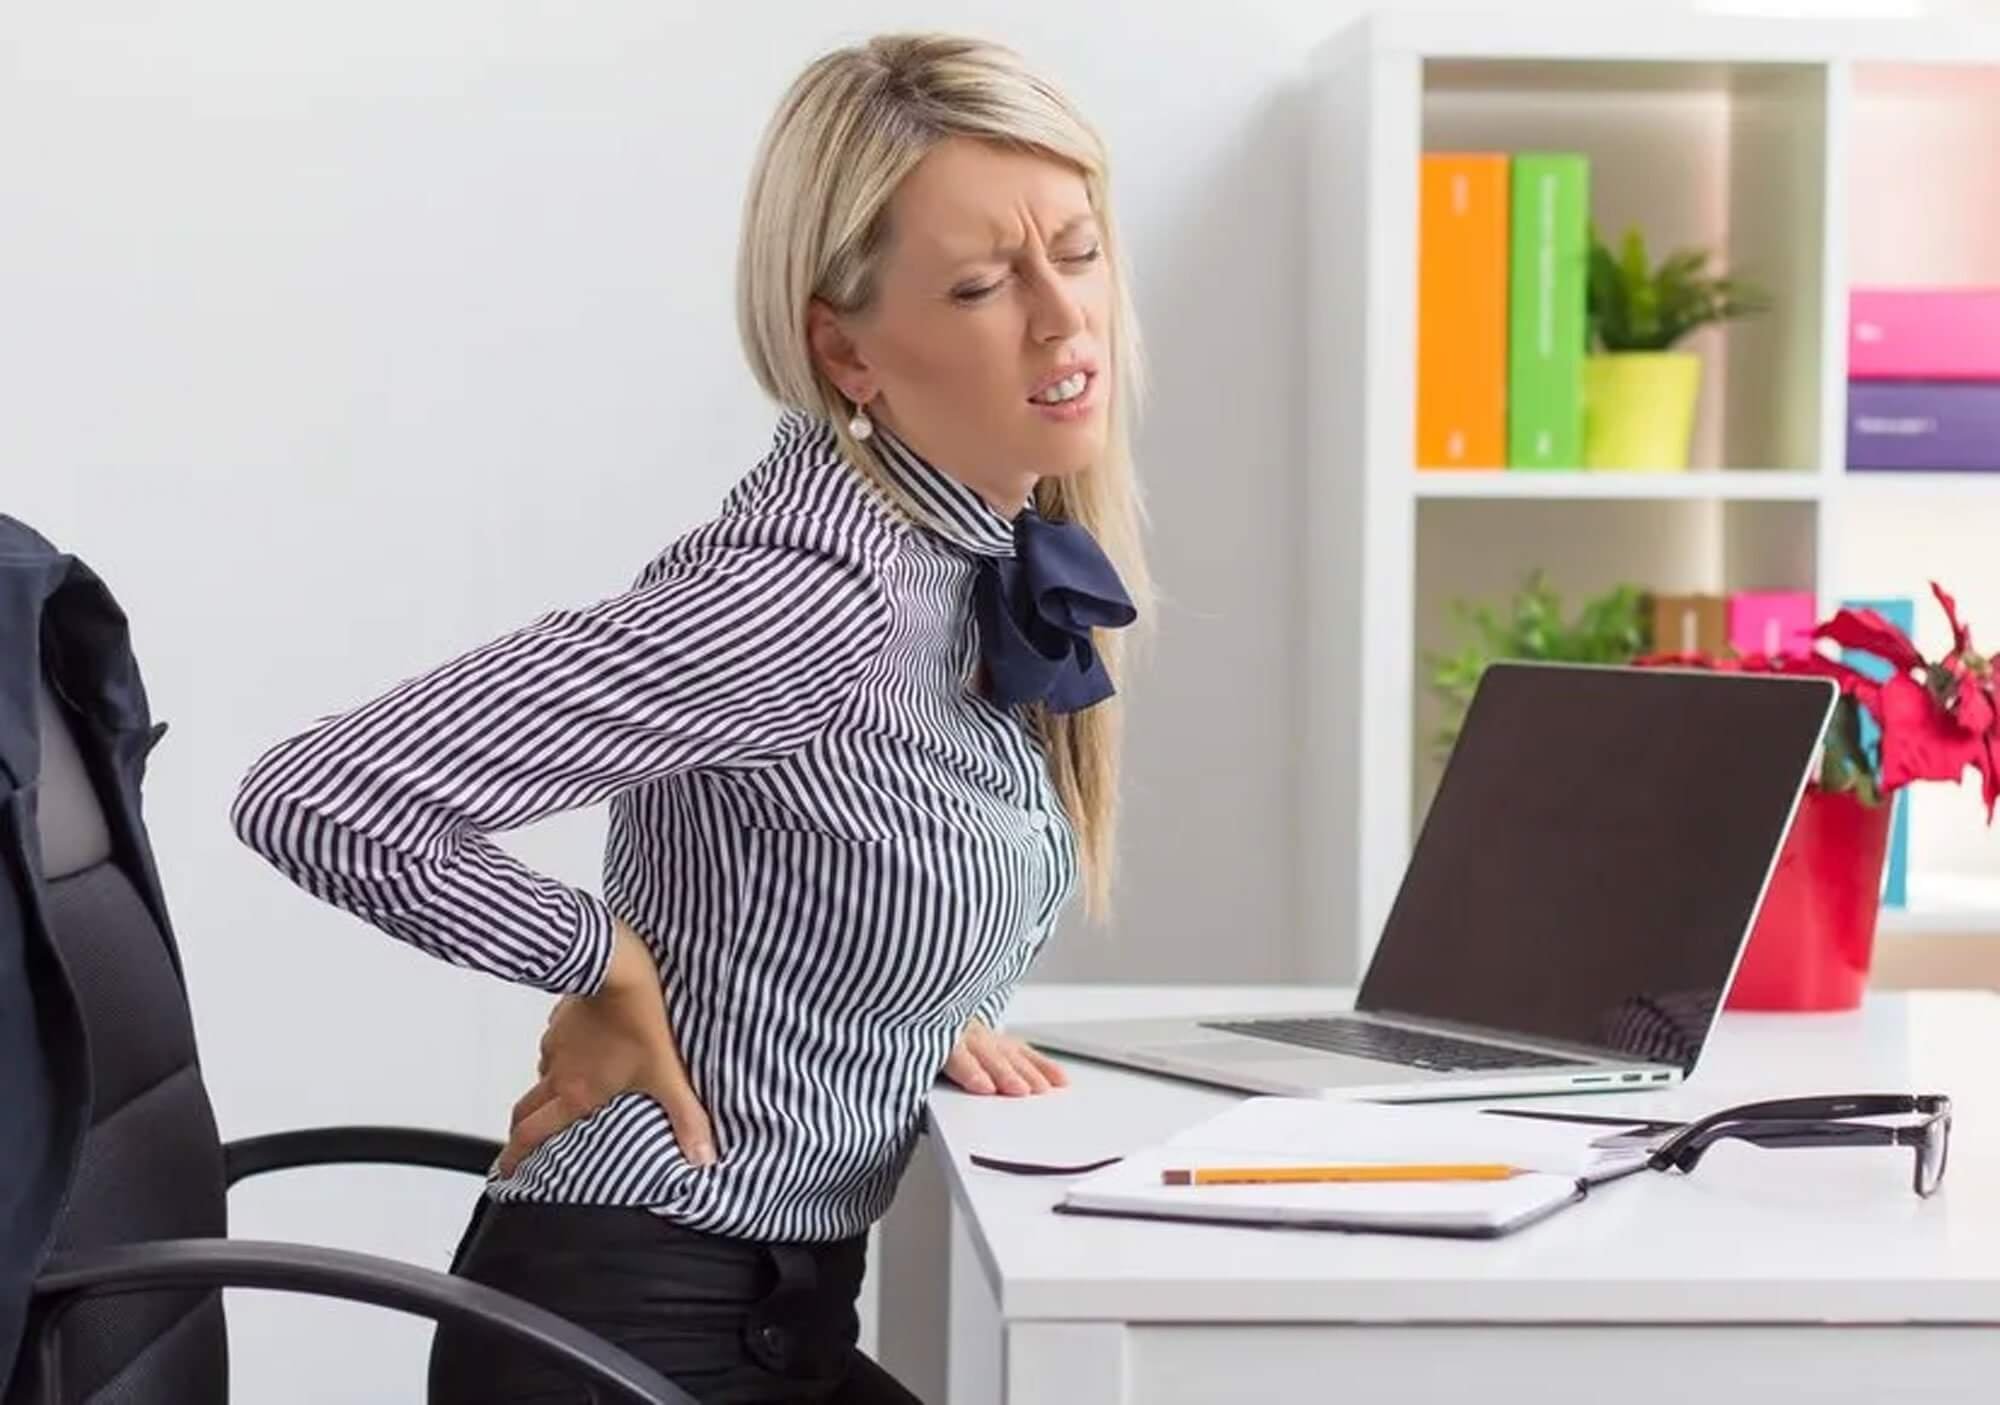 What You Should Know About Upper Back Pain from Sitting at a Desk